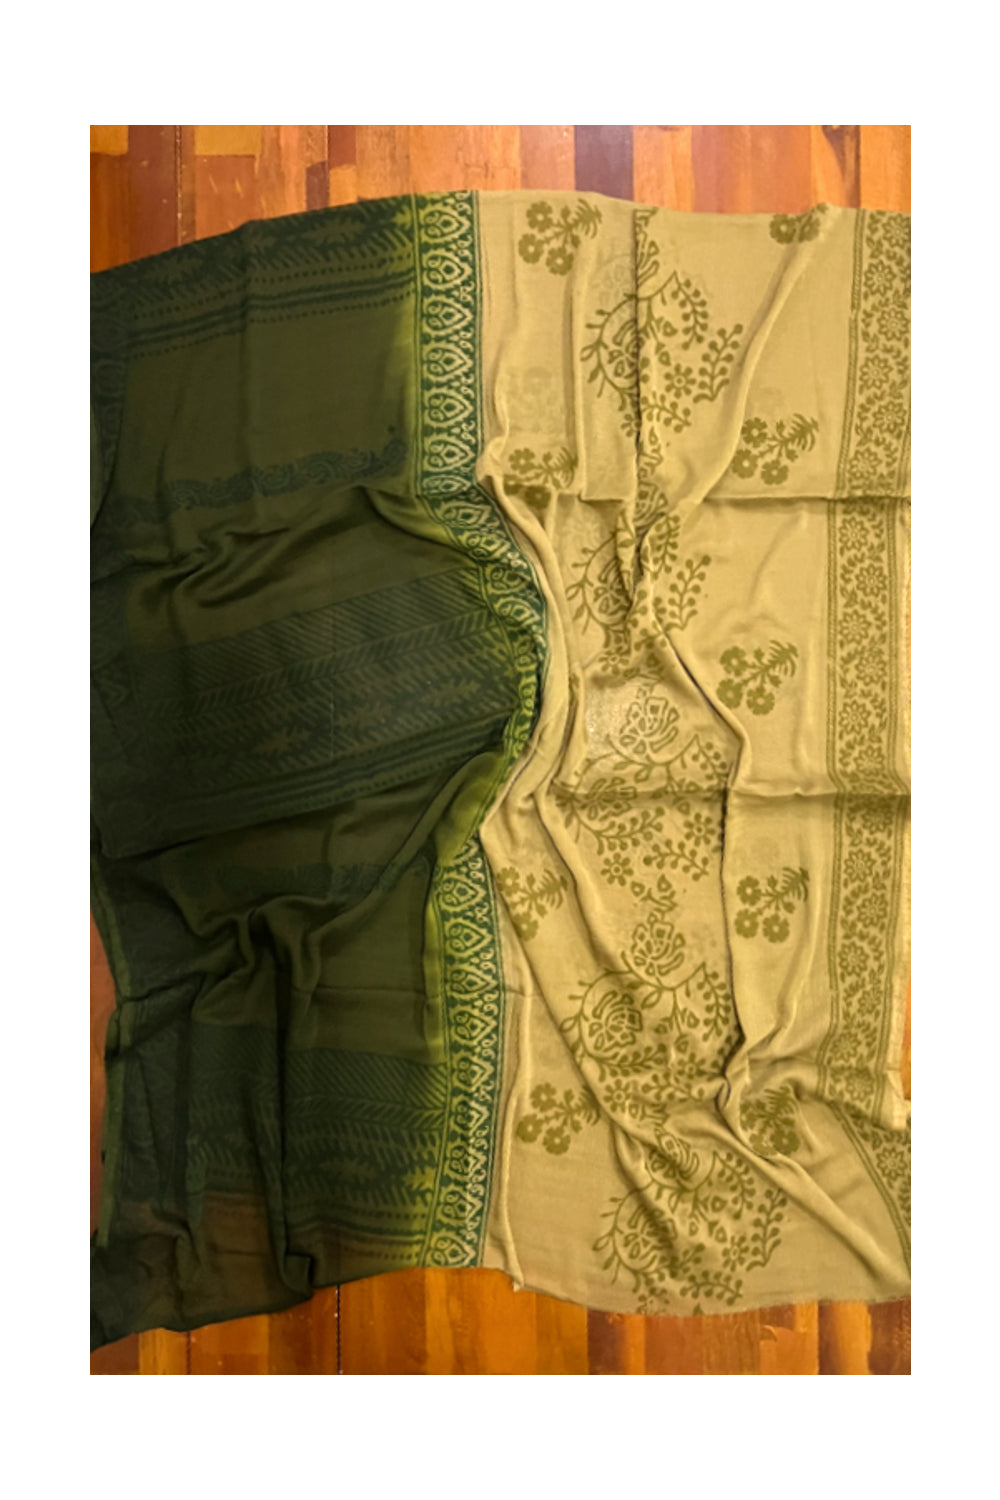 Southloom™ Crepe Churidar Salwar Suit Material in Green with Floral Prints